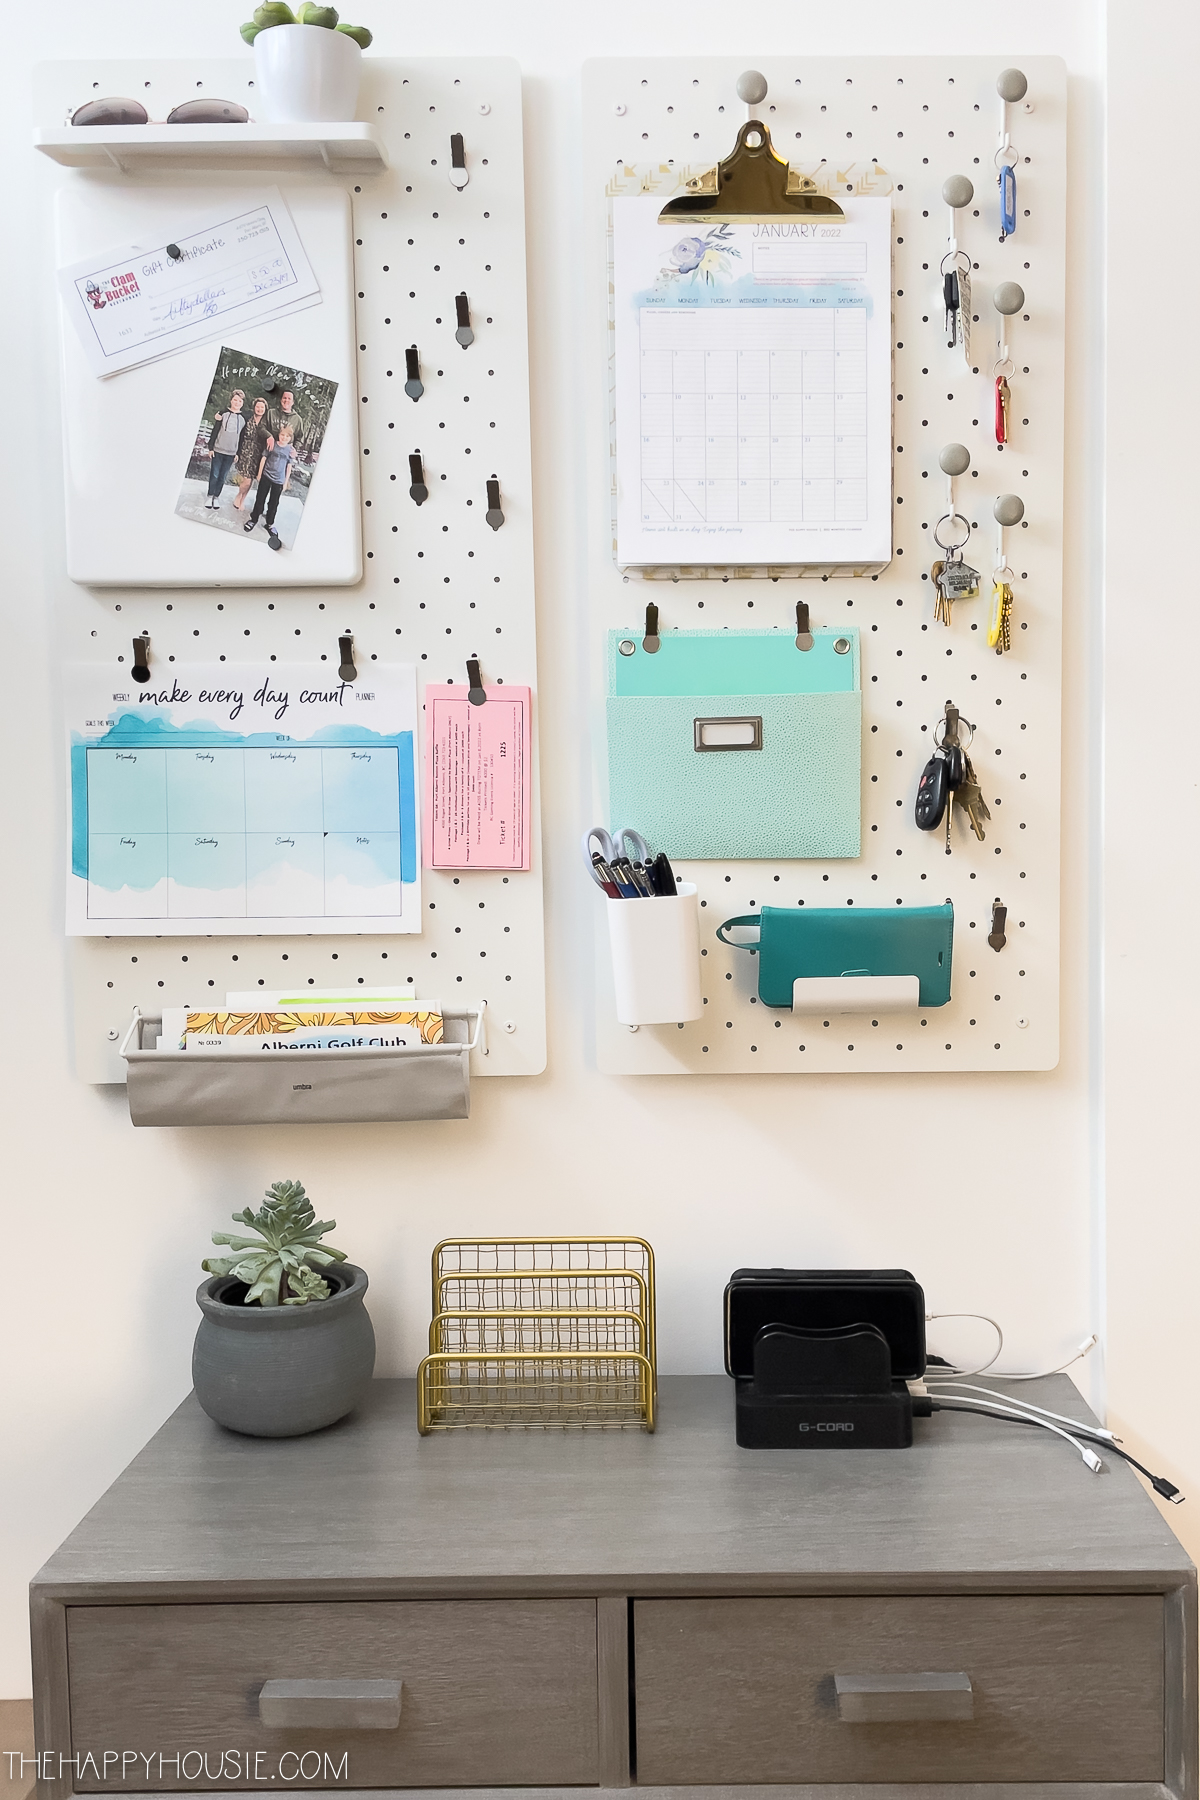 Pegboard organizer on the wall turned into a family command center.